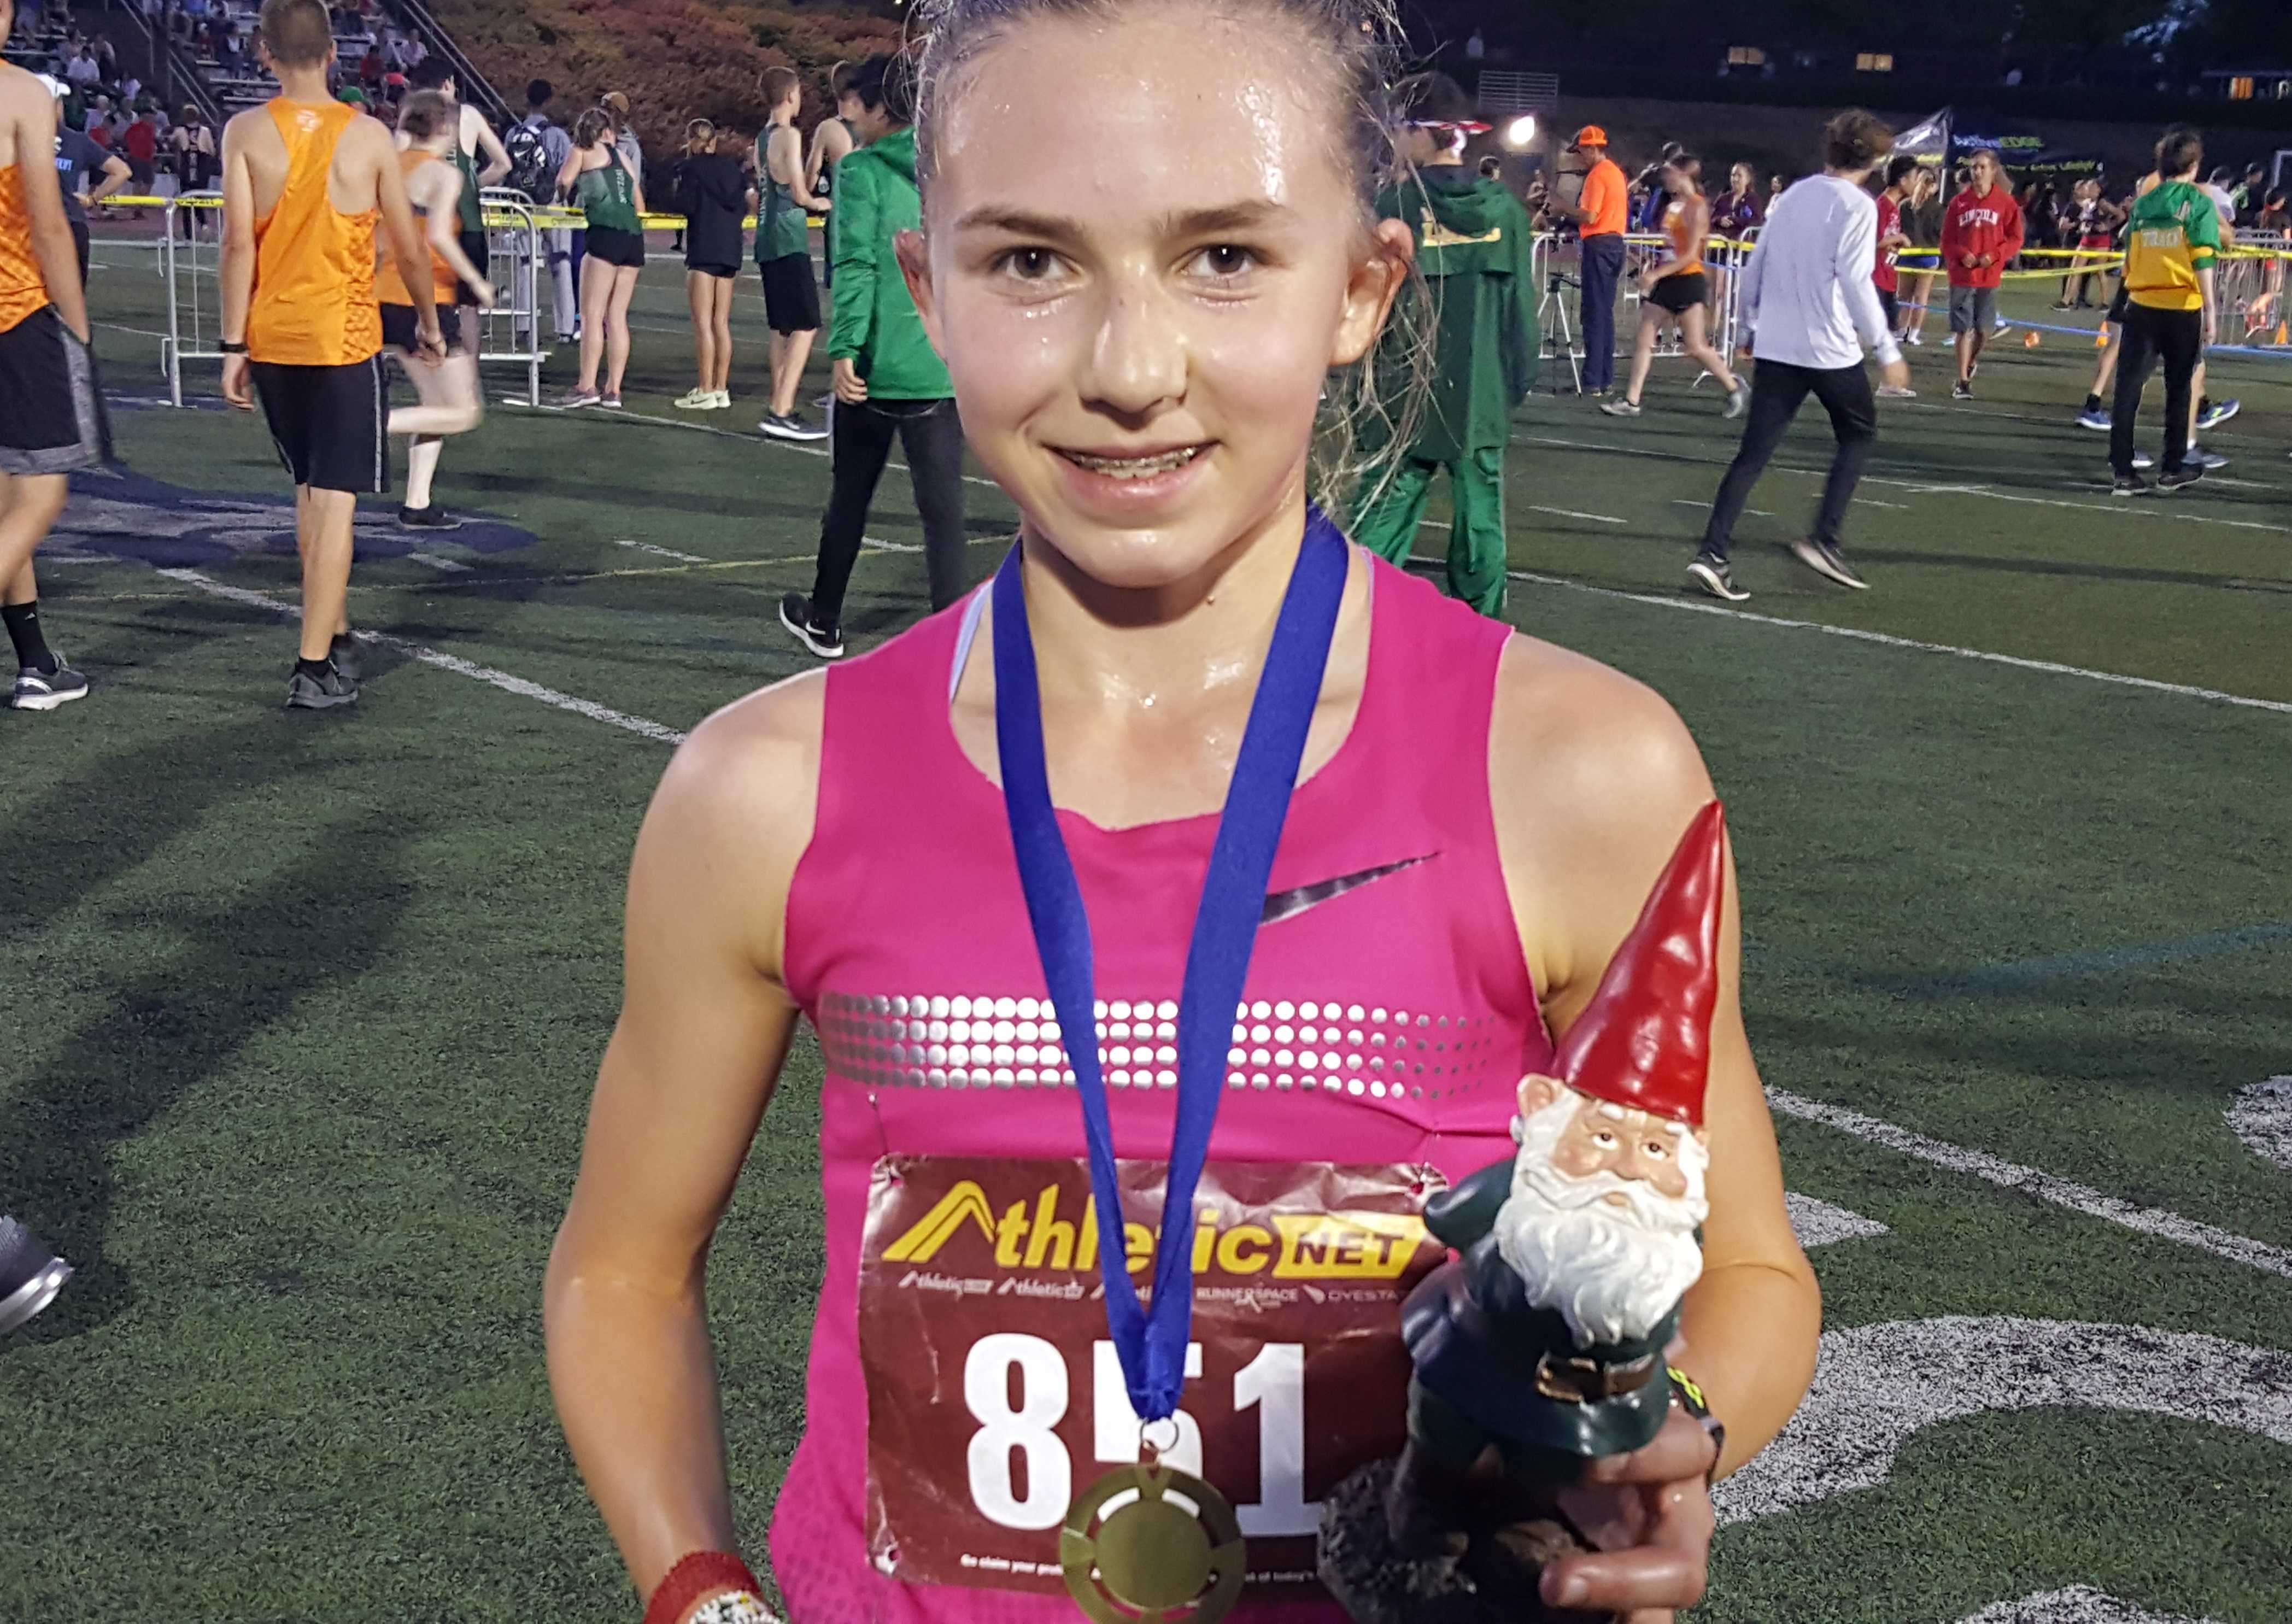 Kate Peters poses with her first-place garden gnome trophy at the Wilsonville Night Meet. (Photo by Doug Binder)